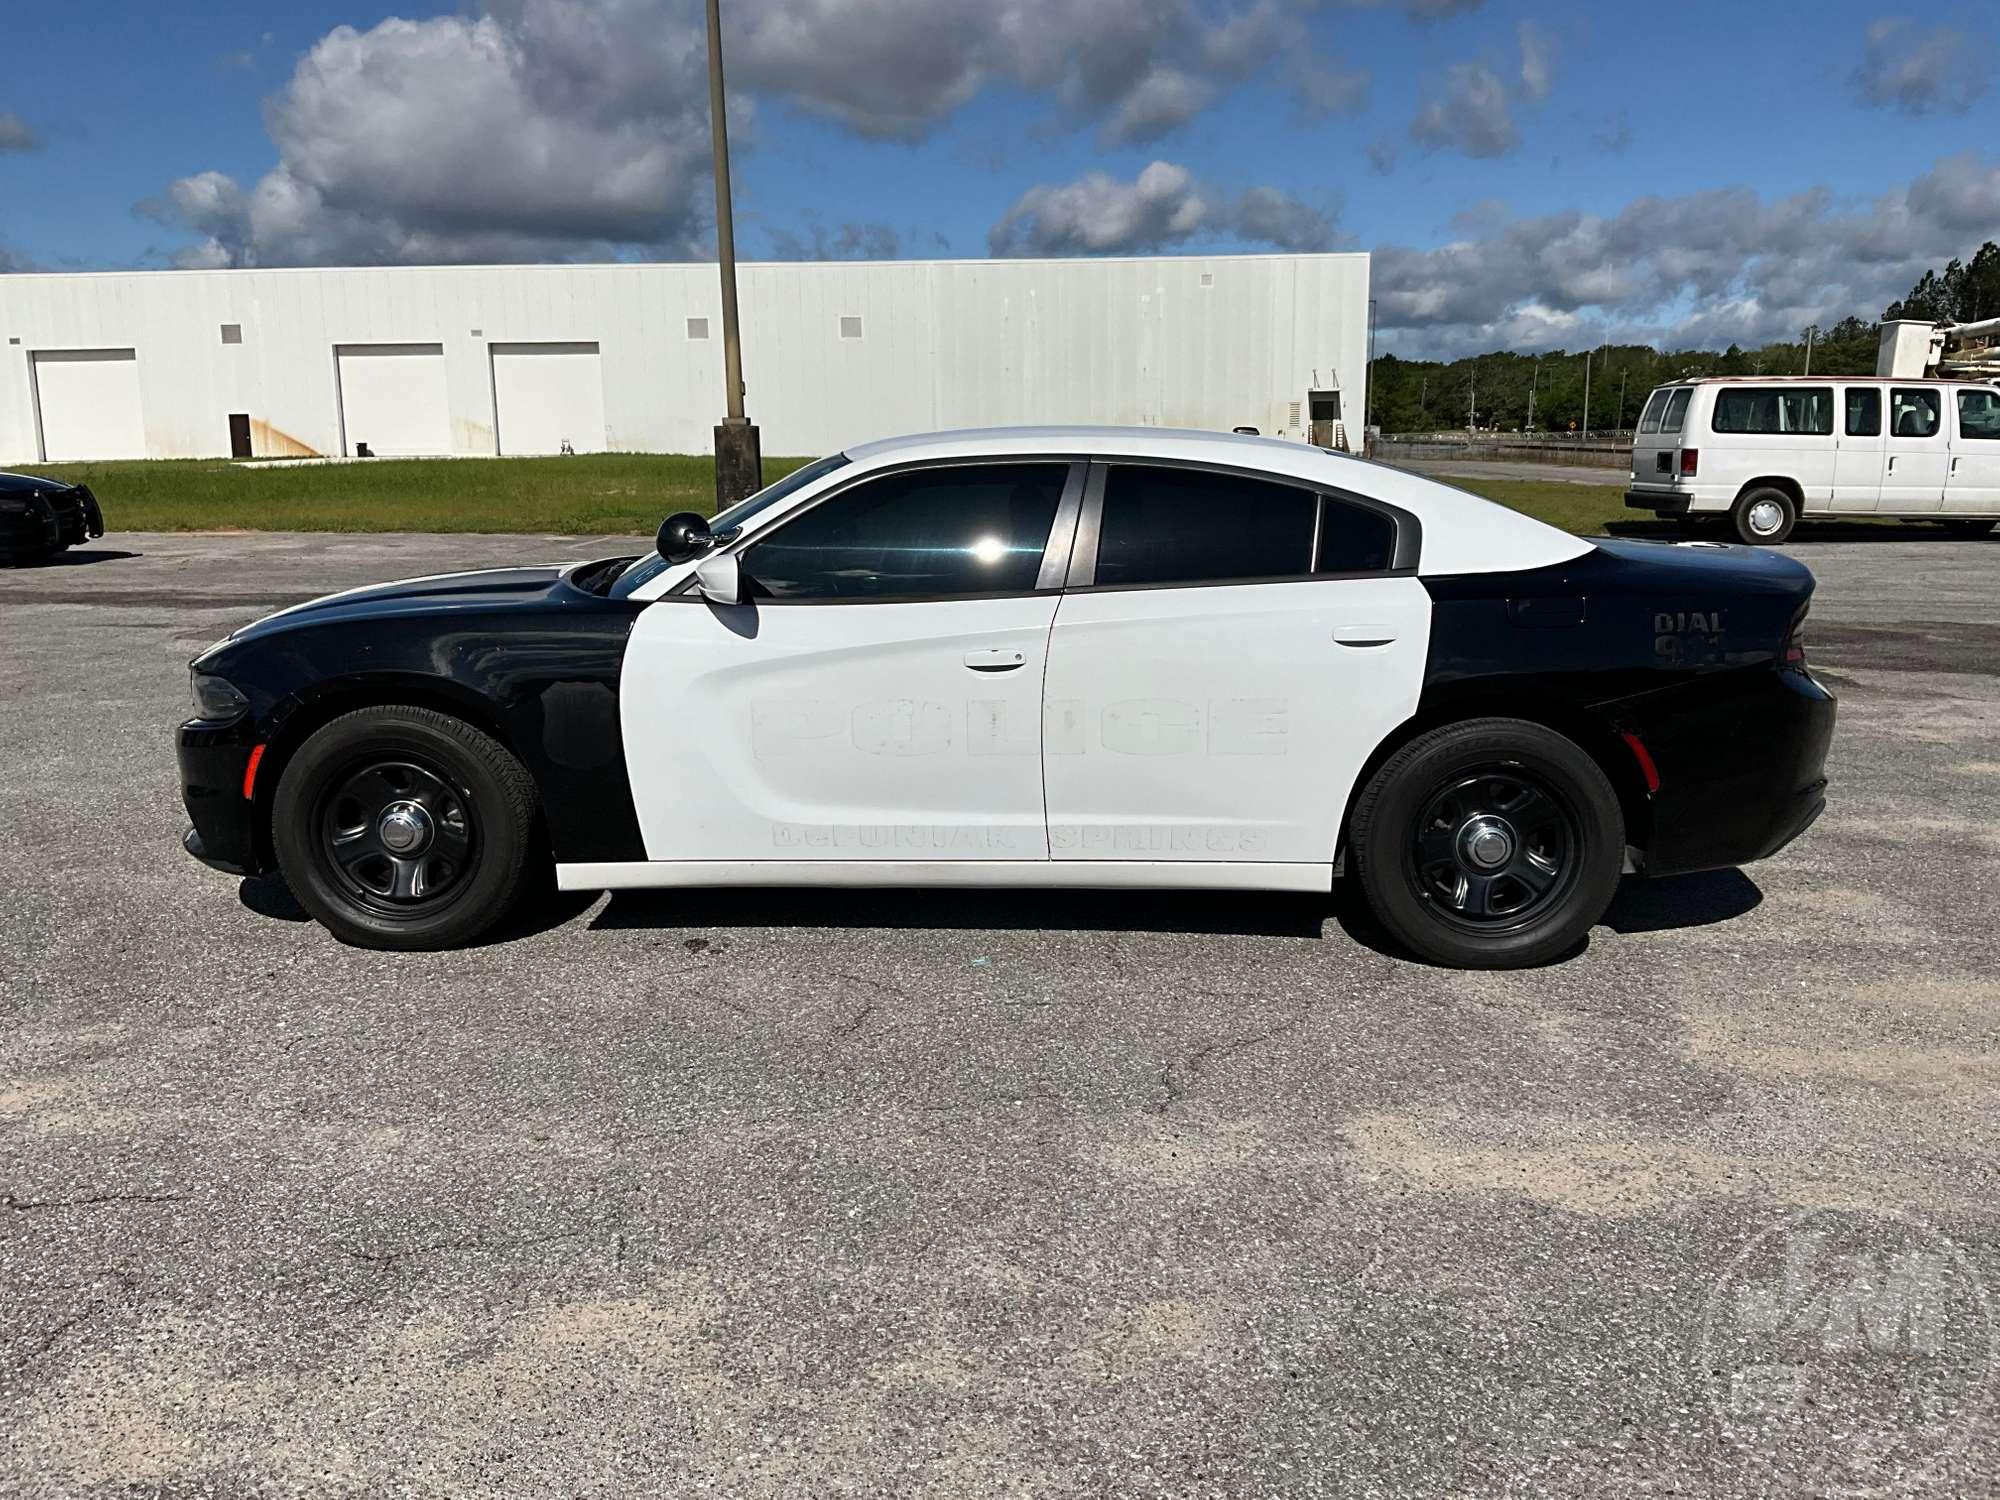 2015 DODGE CHARGER VIN: 2C3CDXAT5FH772070 2WD